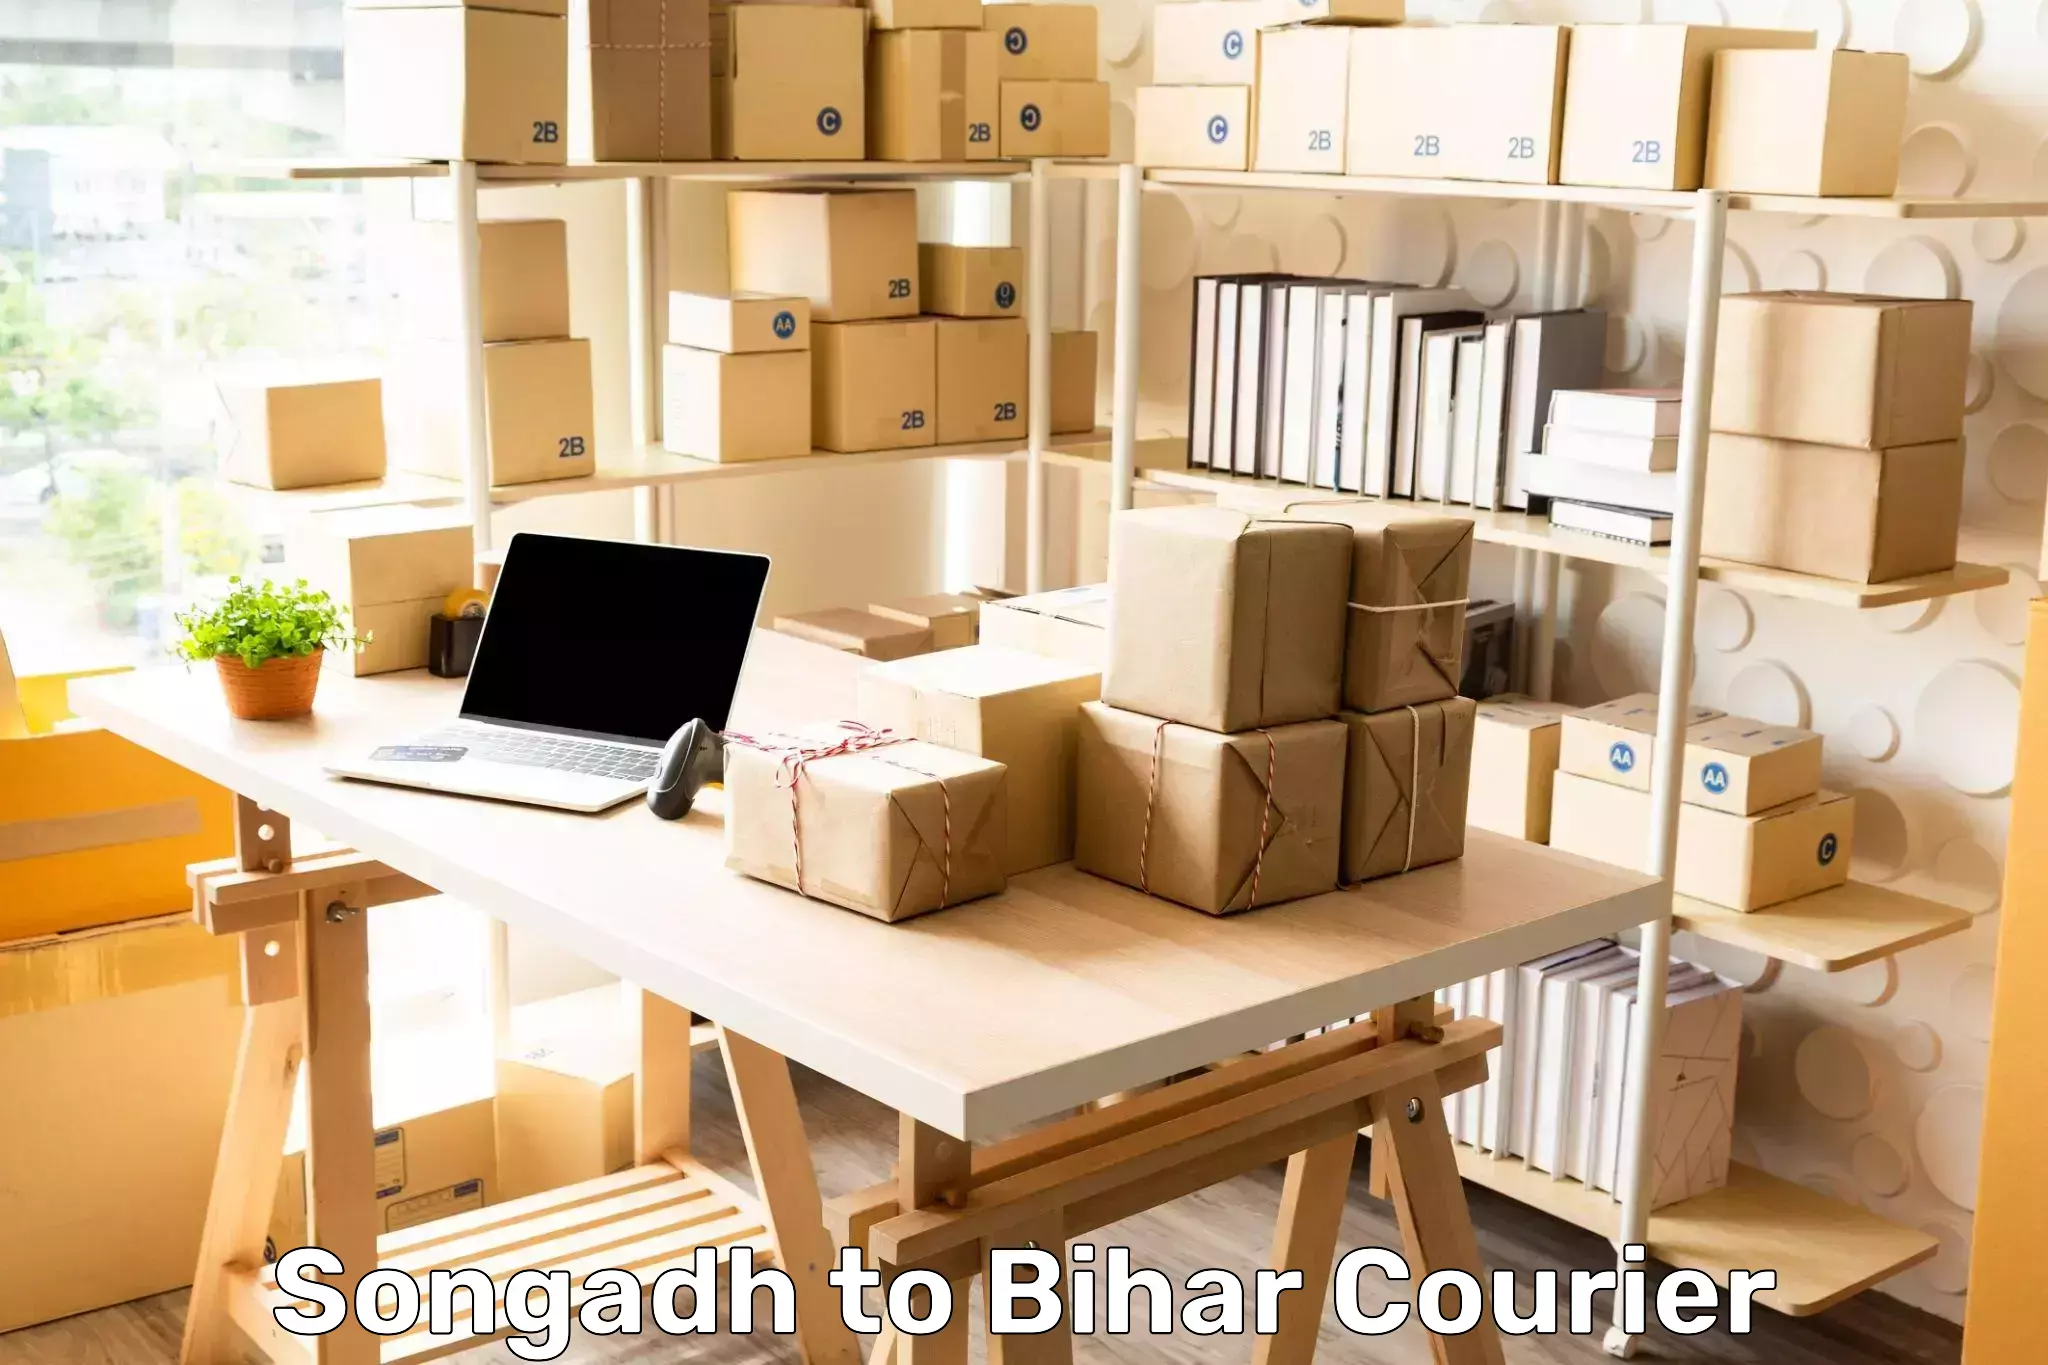 Personal parcel delivery in Songadh to Bikramganj